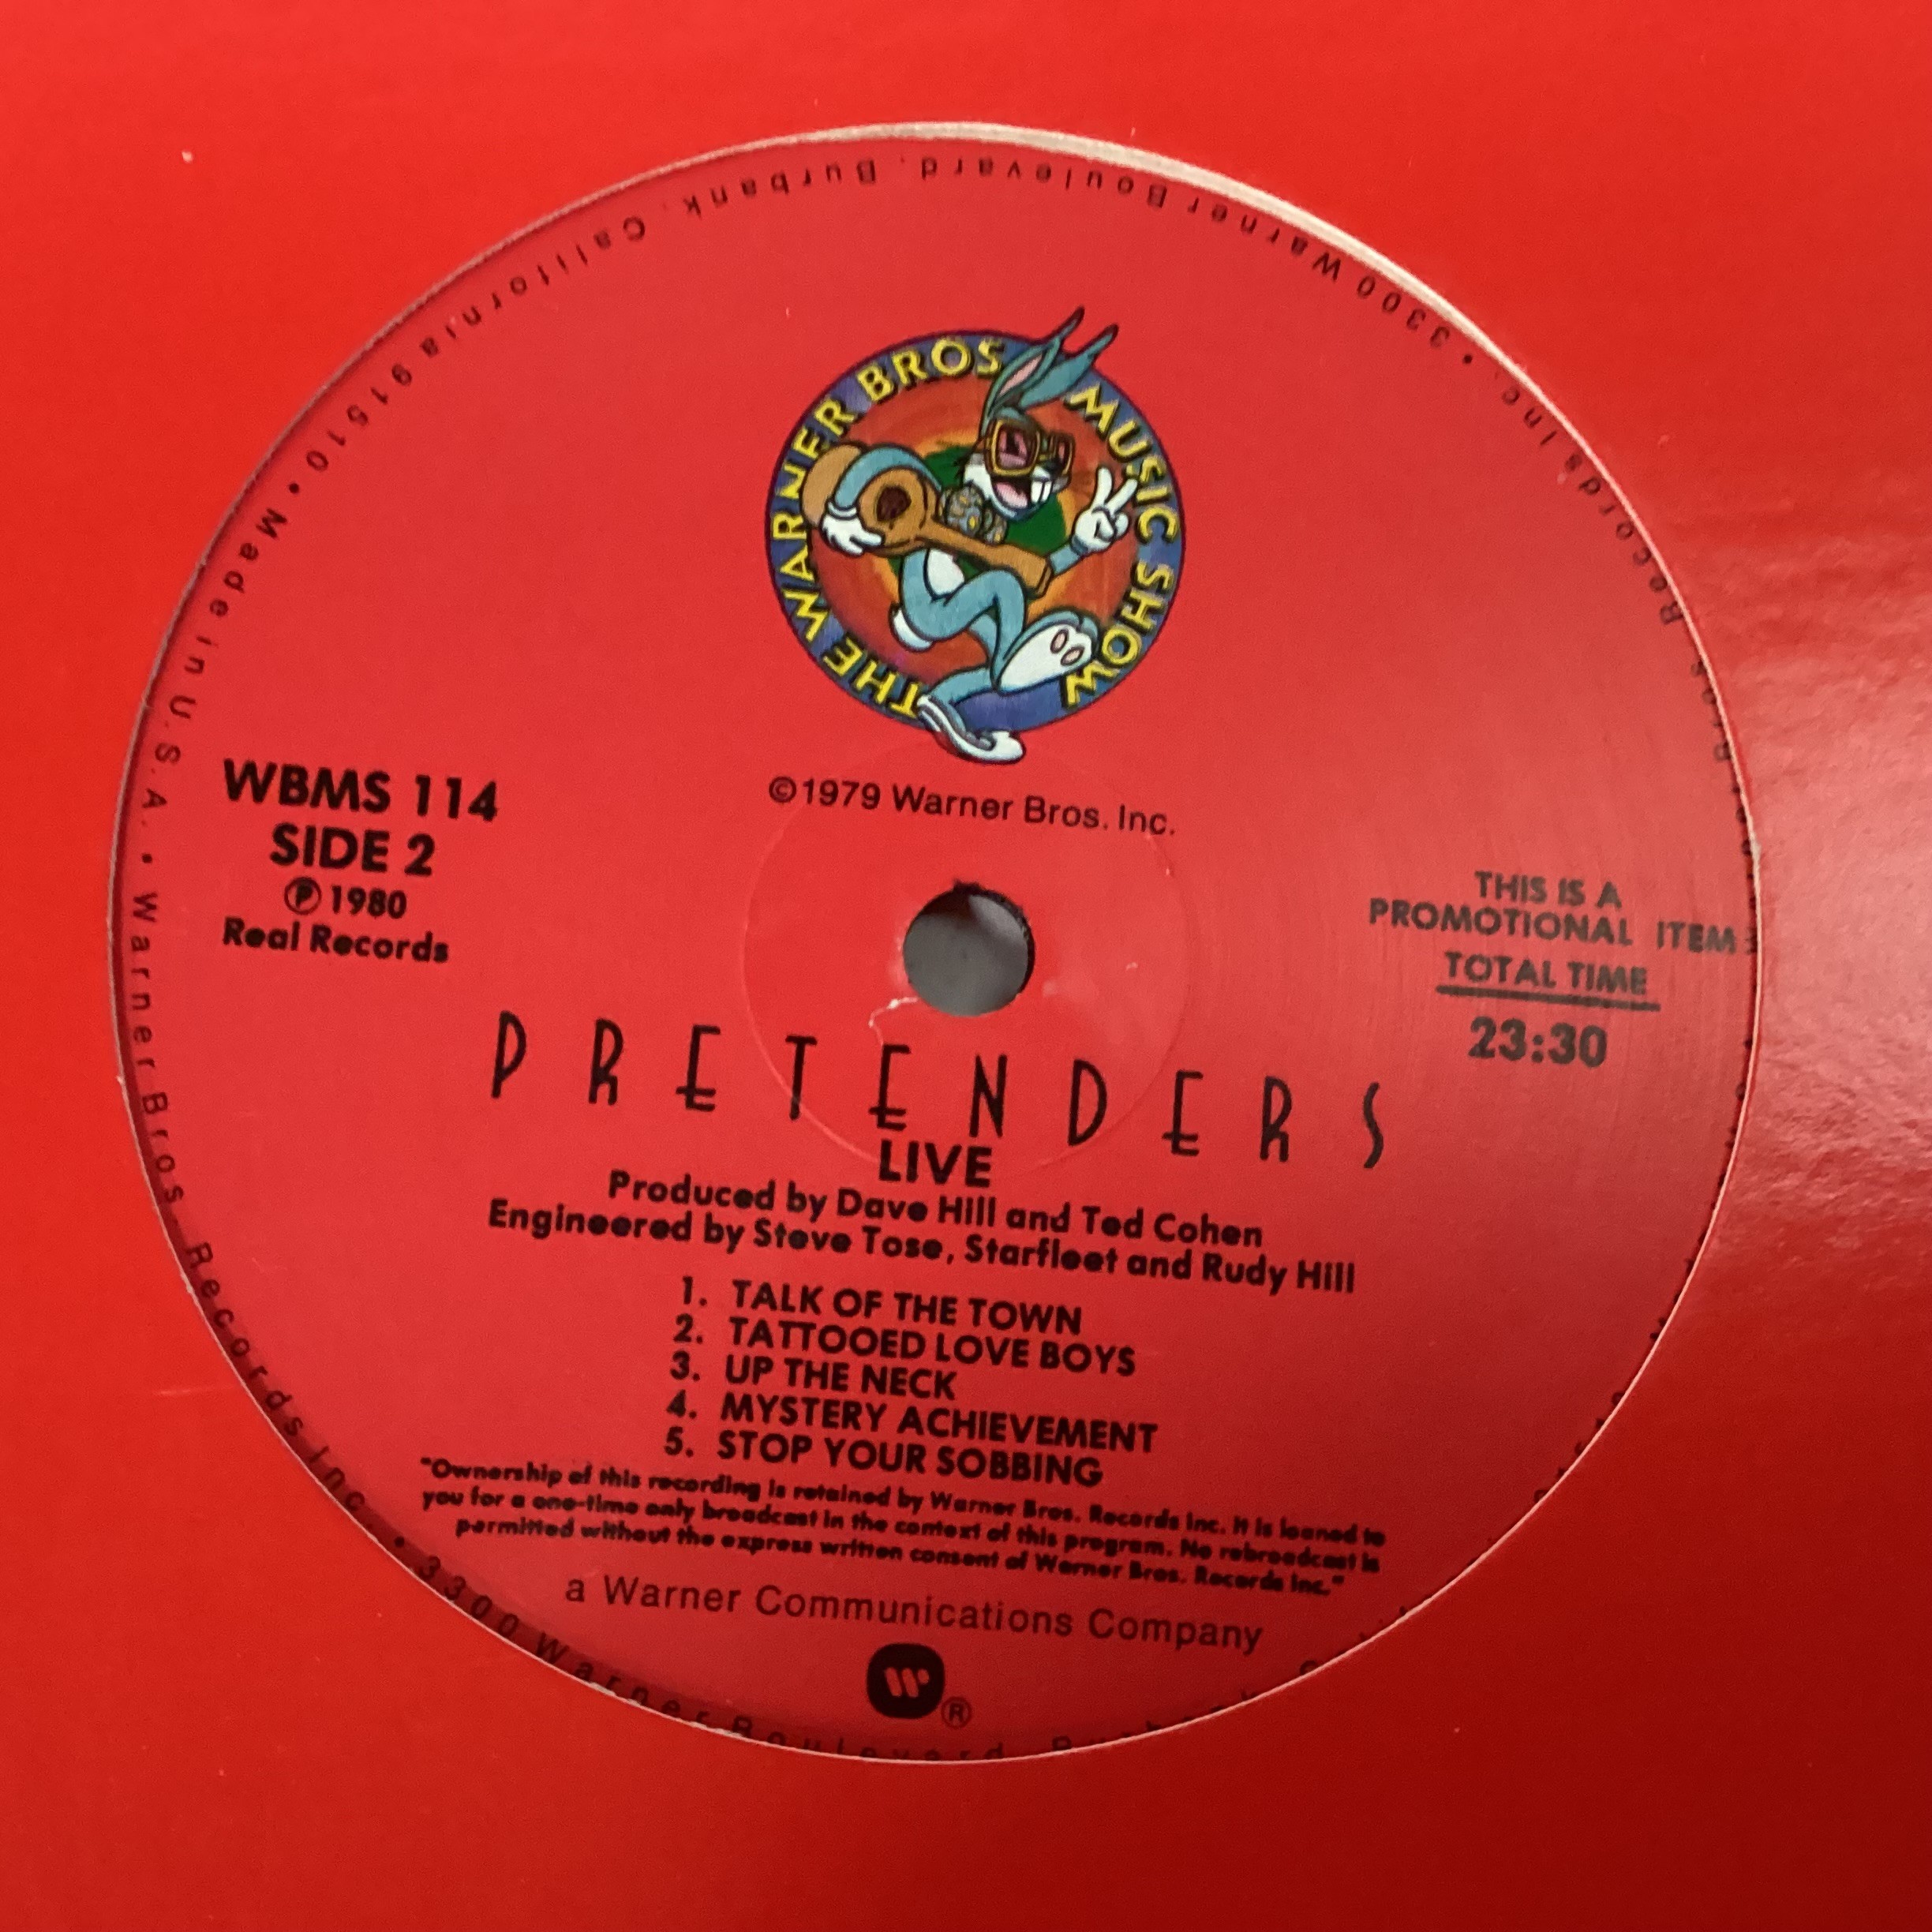 PRETENDERS 'LIVE' PROMO-ONLY VINYL LP. Released on Warner Brothers Music Show label No. WBMS 114 - Image 3 of 3